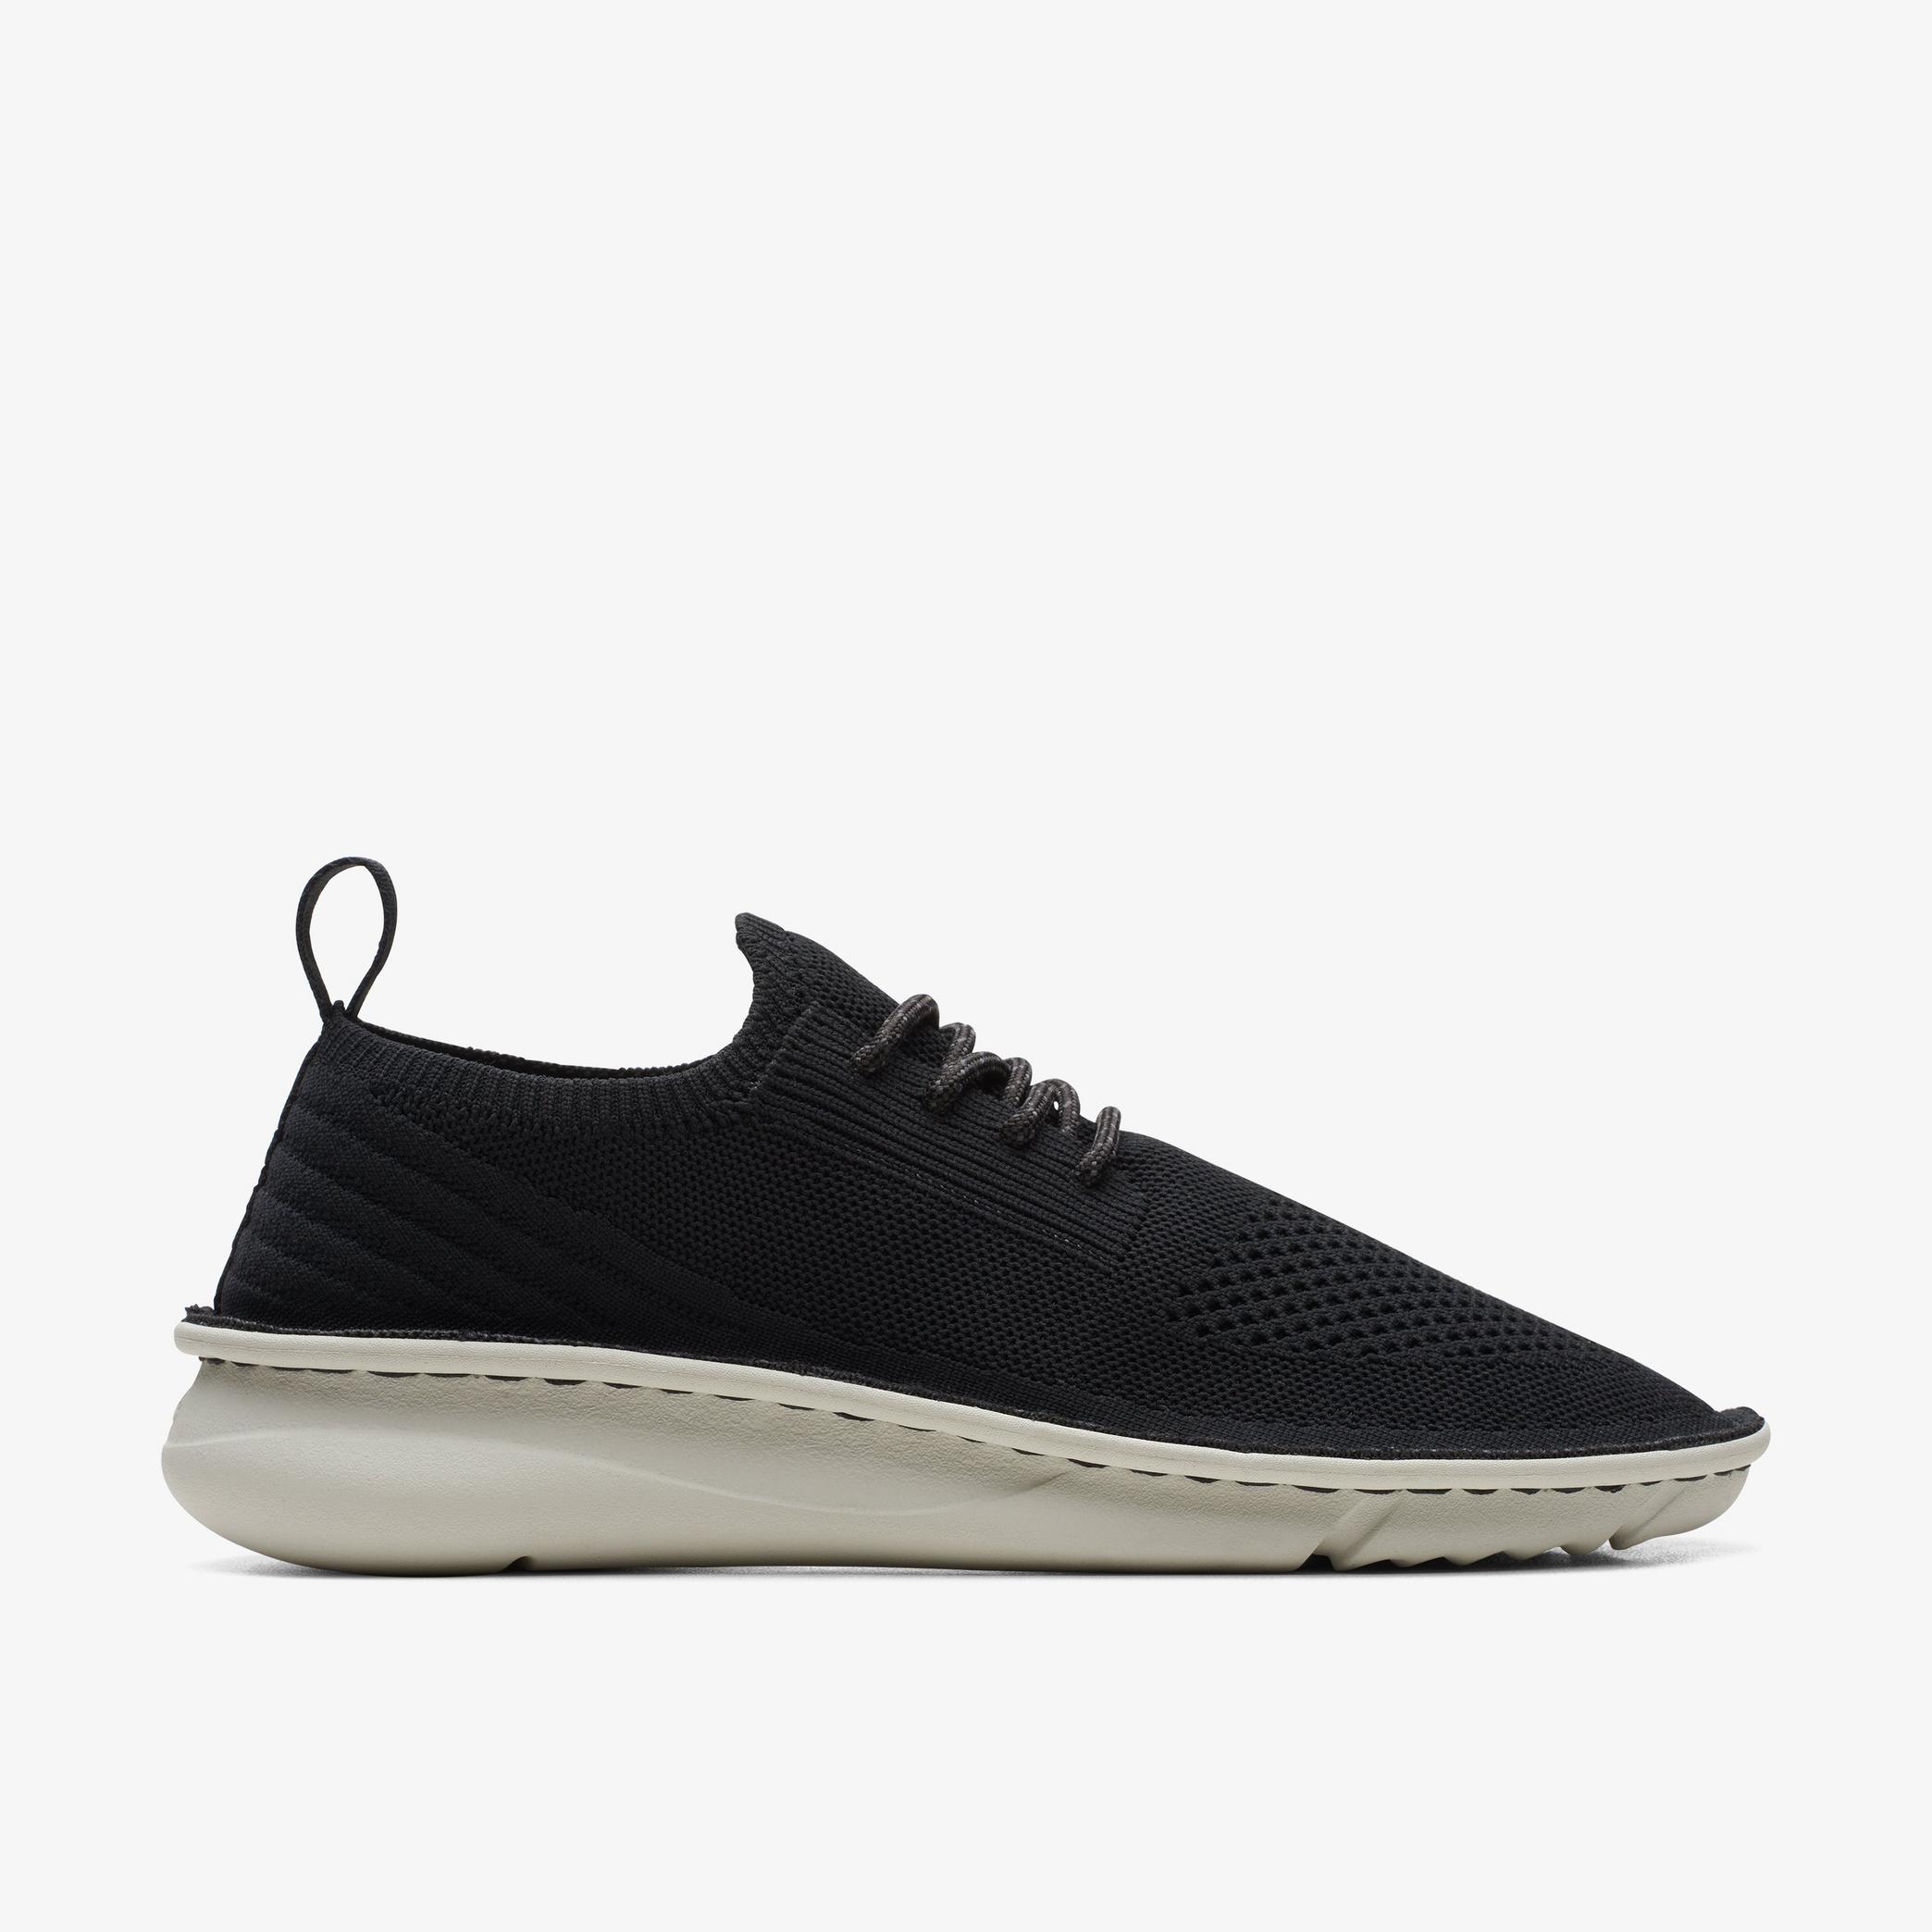 Clarks Origin2 Black Knit Trainers, view 1 of 6